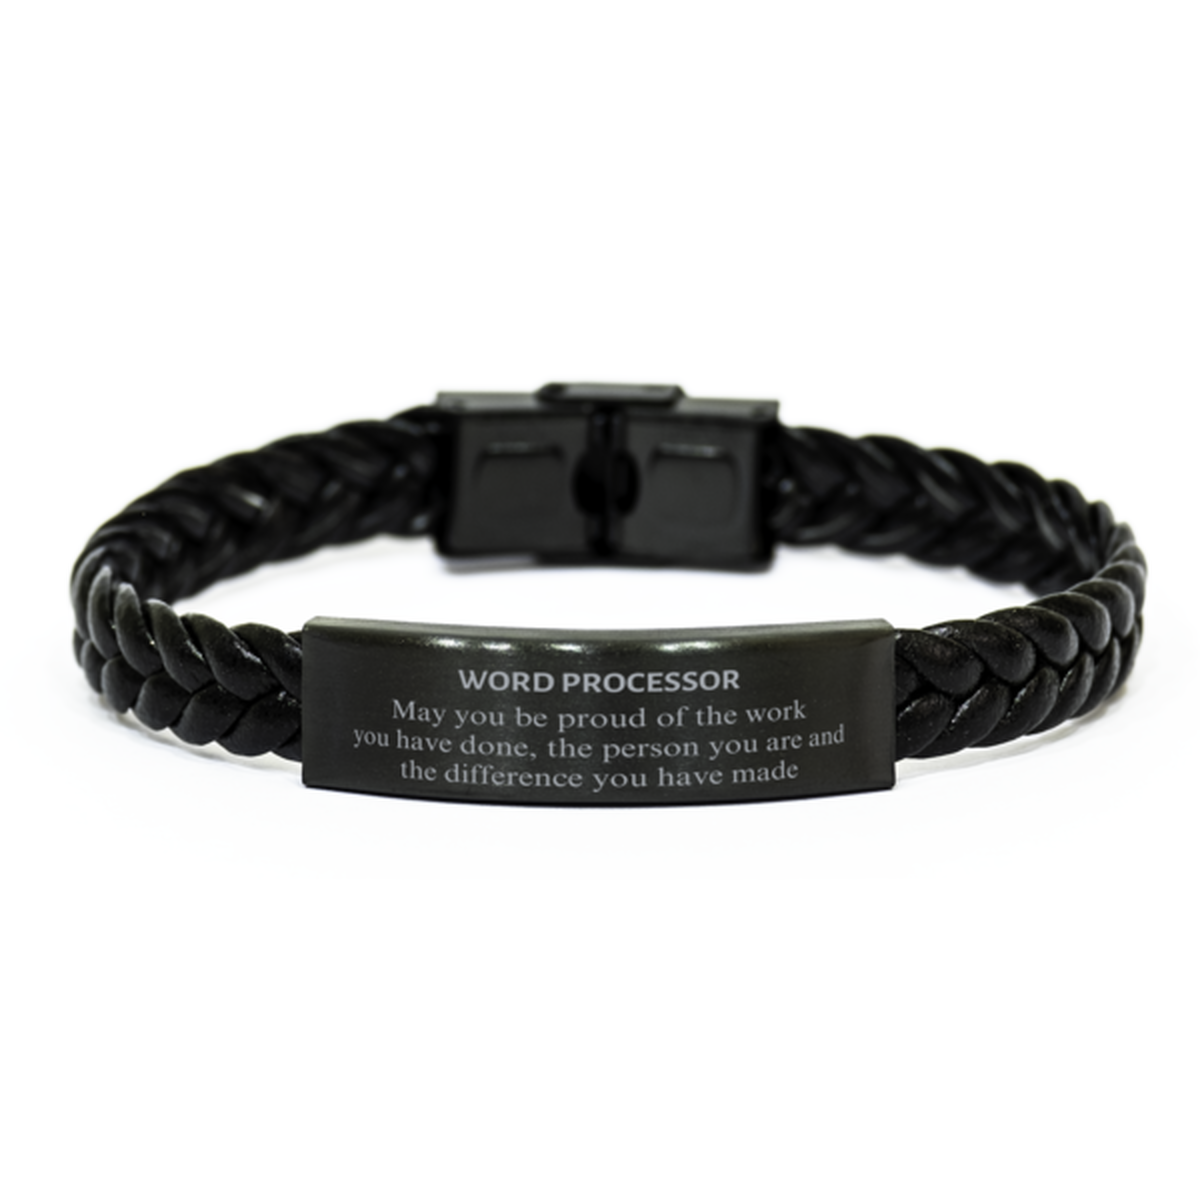 Word Processor May you be proud of the work you have done, Retirement Word Processor Braided Leather Bracelet for Colleague Appreciation Gifts Amazing for Word Processor